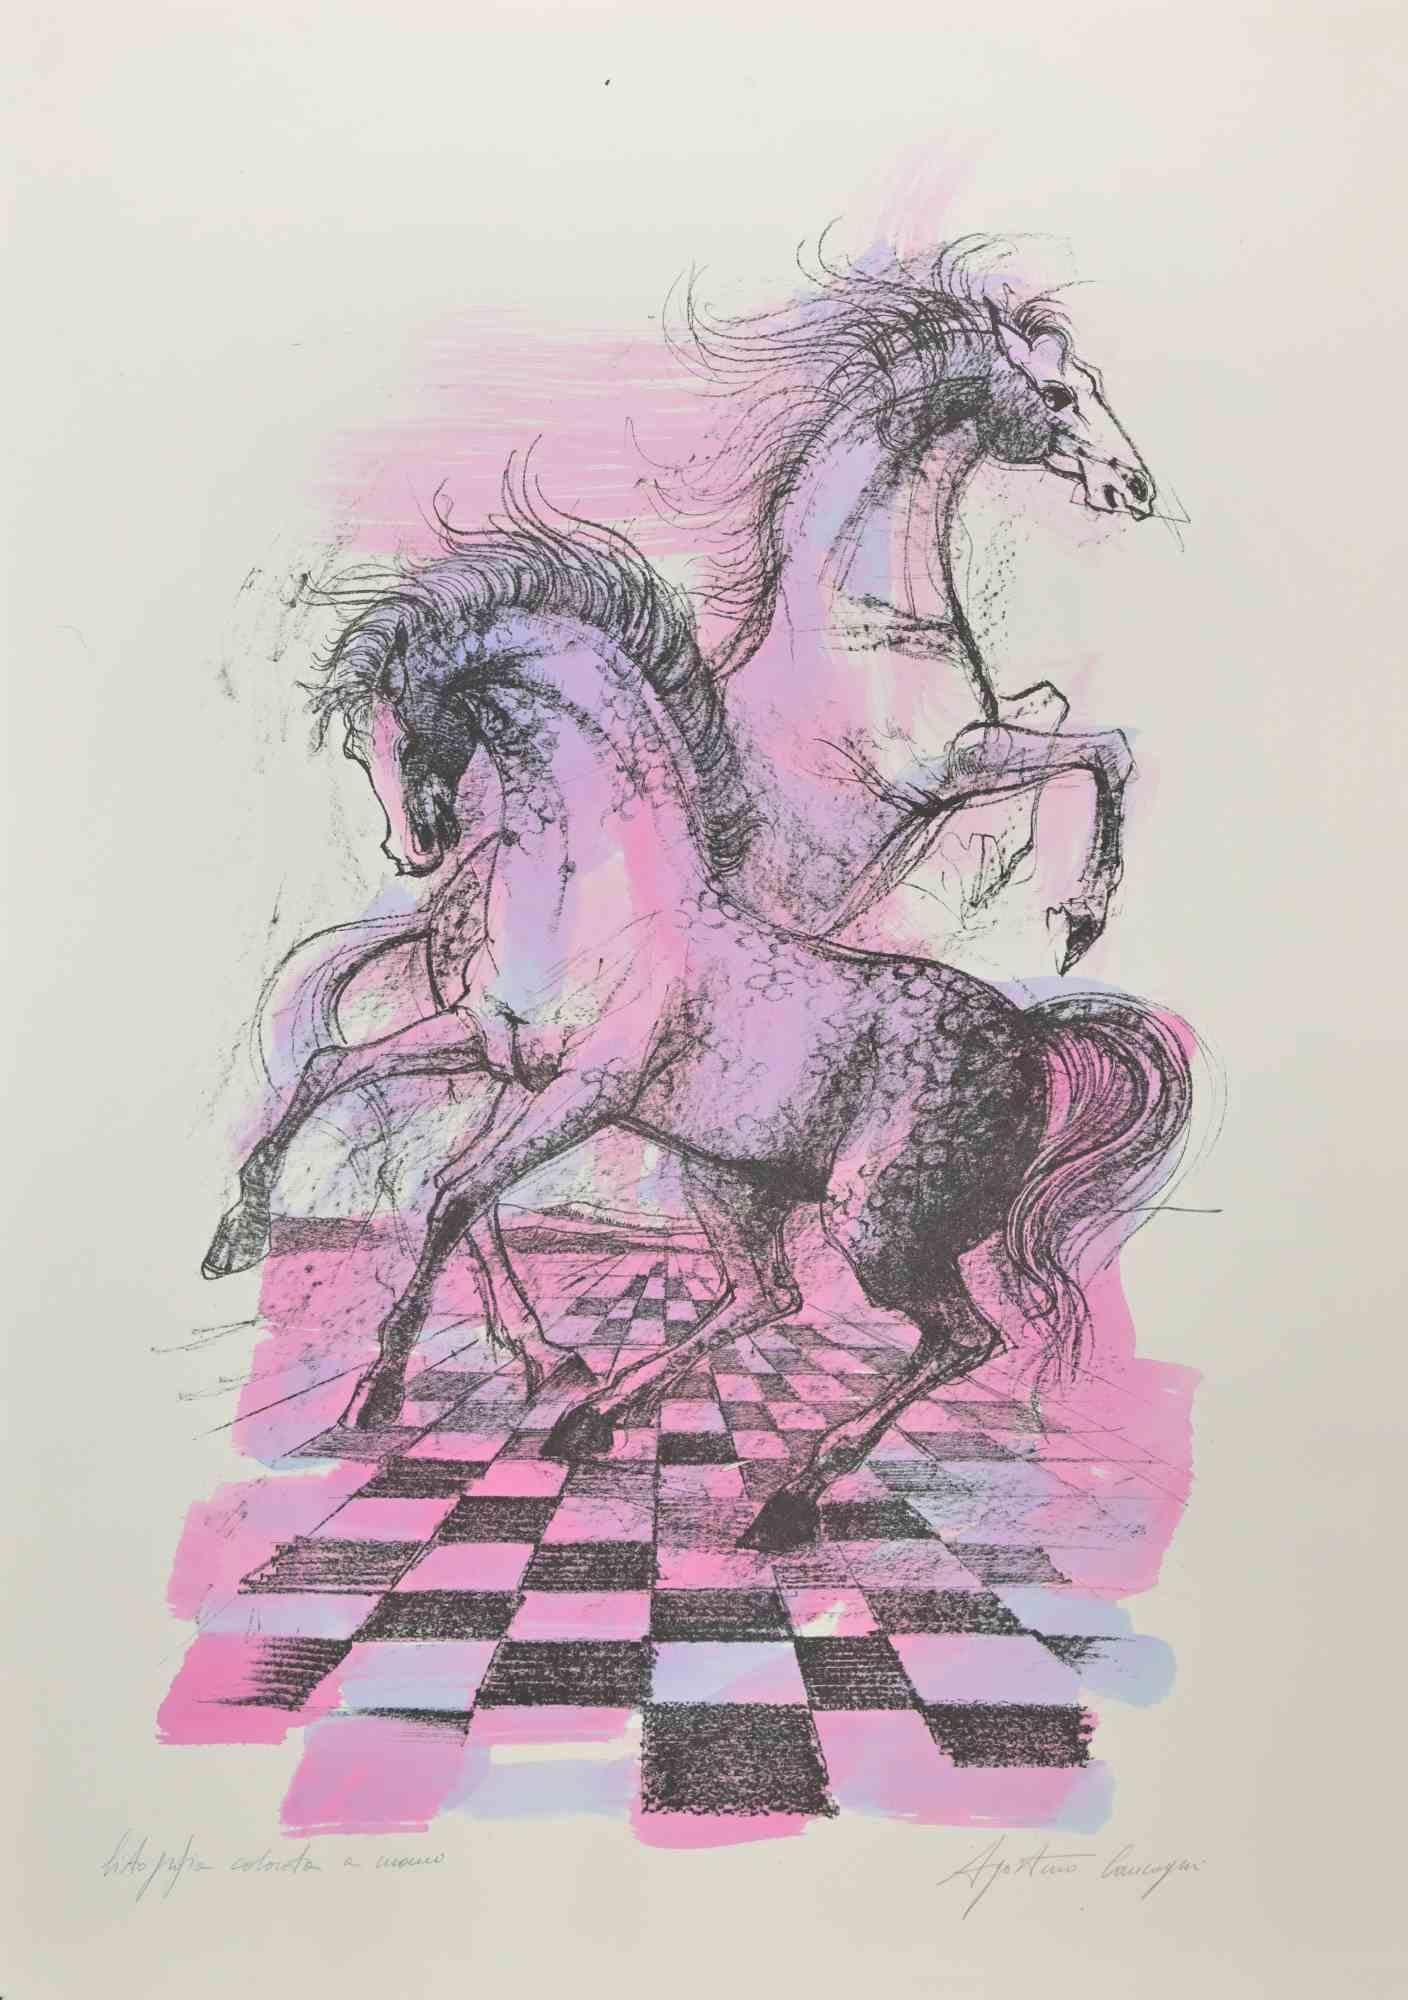 Free Horses is a beautiful lithograph realized by Agostino Cancogni in the 1980s.

Hand-watercolored lithograph on paper. Unique specimen. 

Personally colored by the artist and hand-signed on the lower right margin. Technique bottom left: 